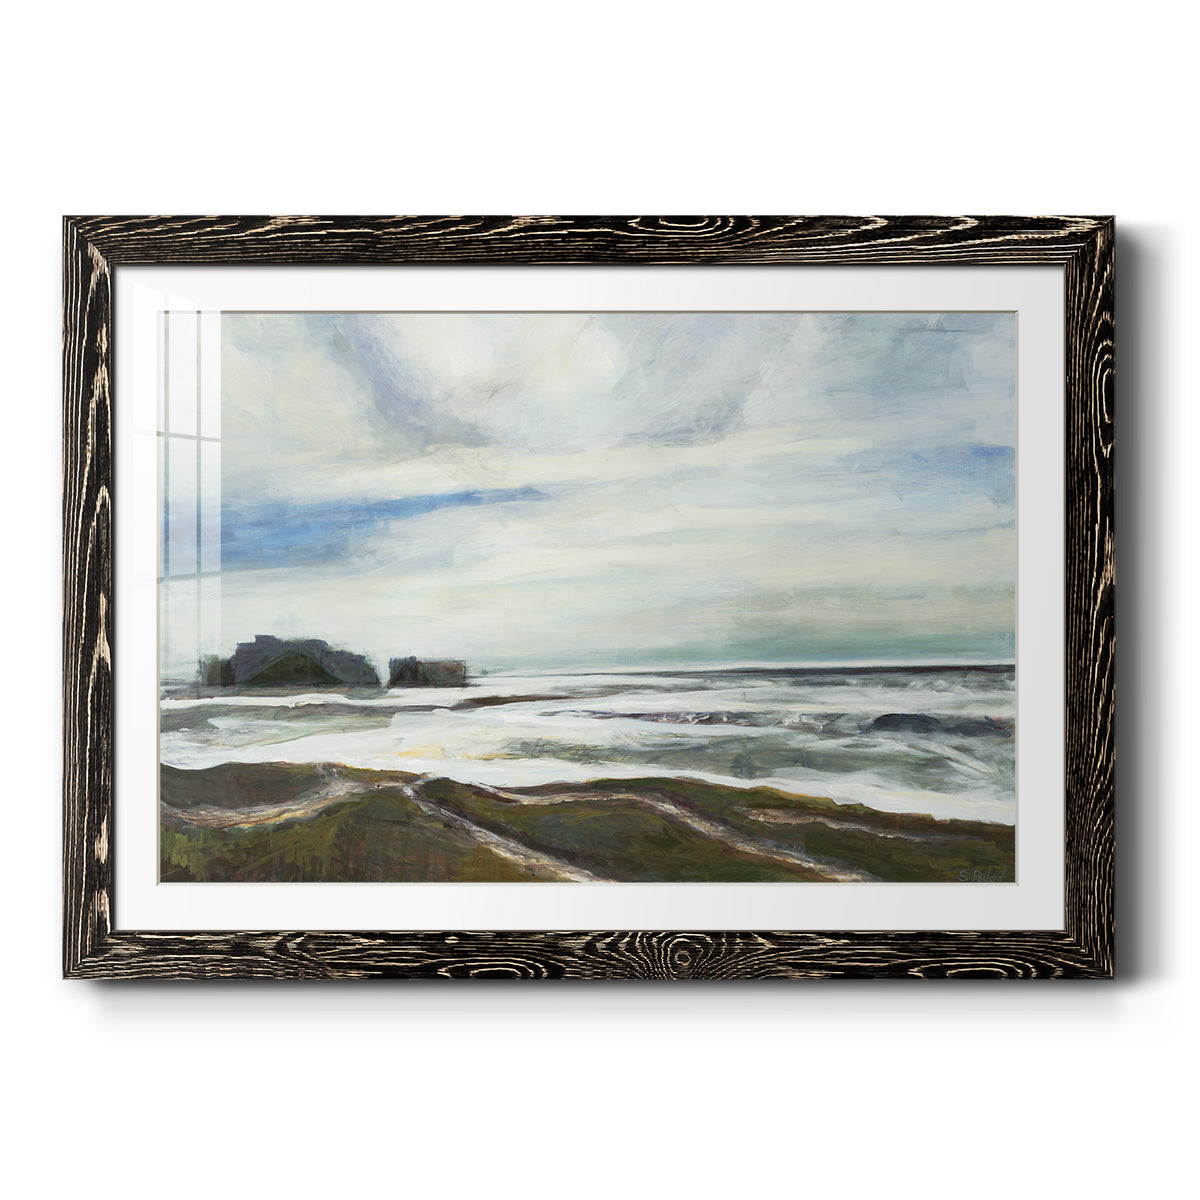 45206-Premium Framed Print - Ready to Hang